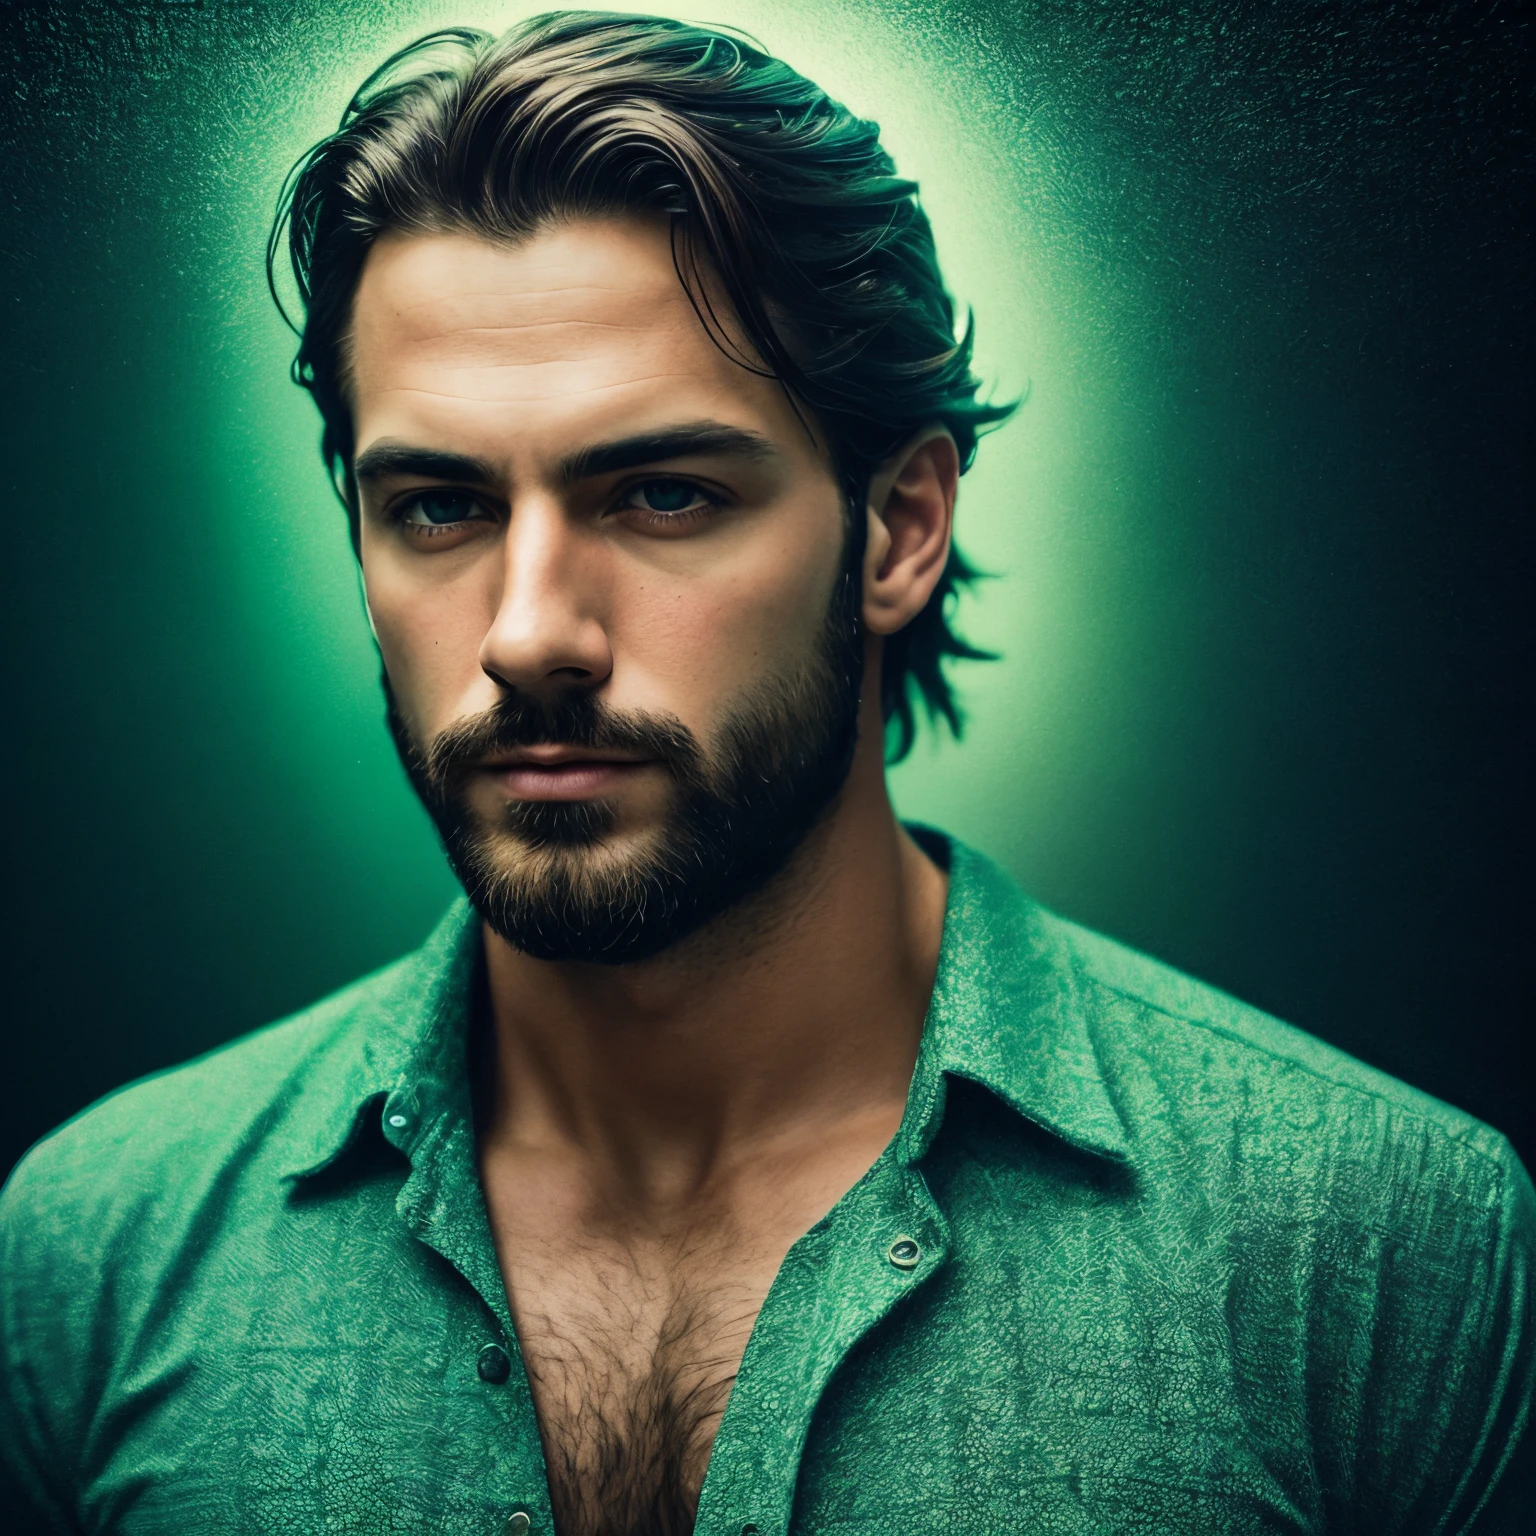 Insanely handsome man in the style of experimental photography, green, expanded portraiture, printed matter, uhd image, color light saturated, outdoor scene